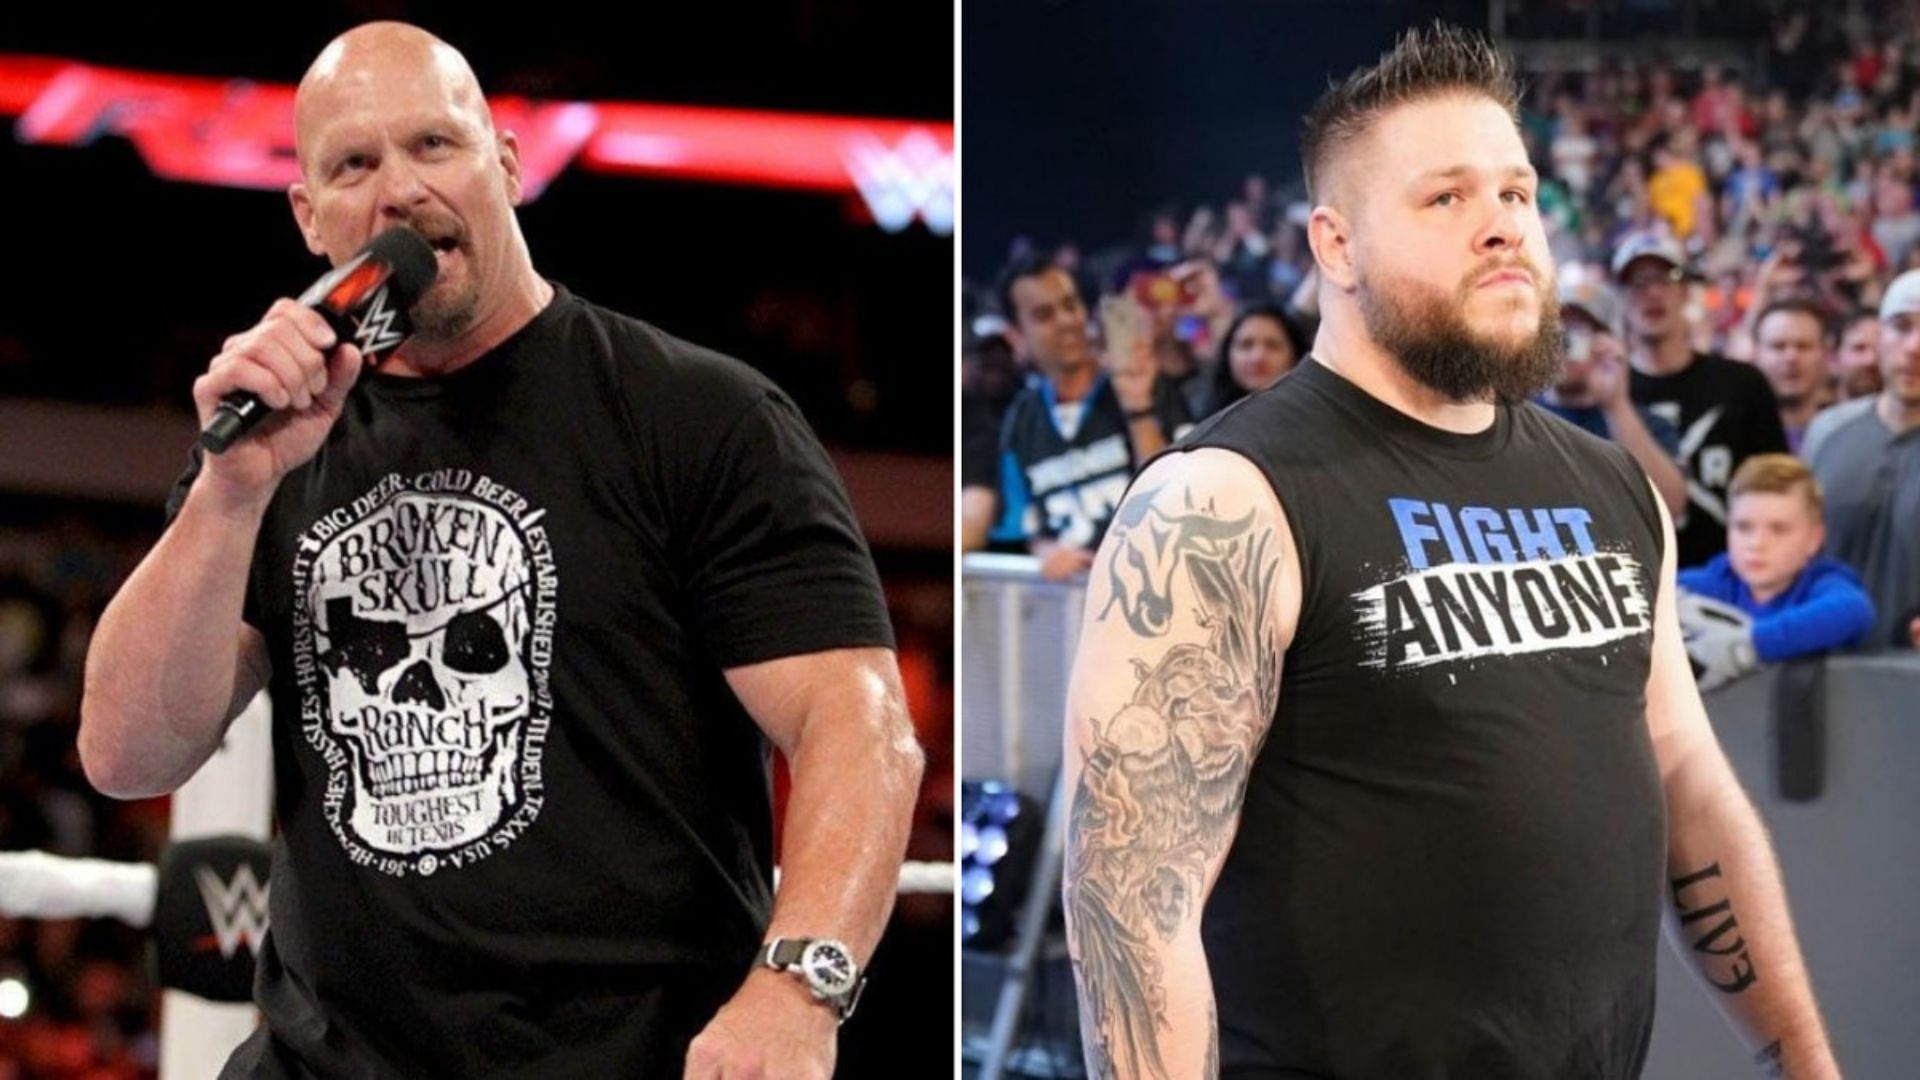 Stone Cold Steve Austin and Kevin Owens will cross paths at WrestleMania.